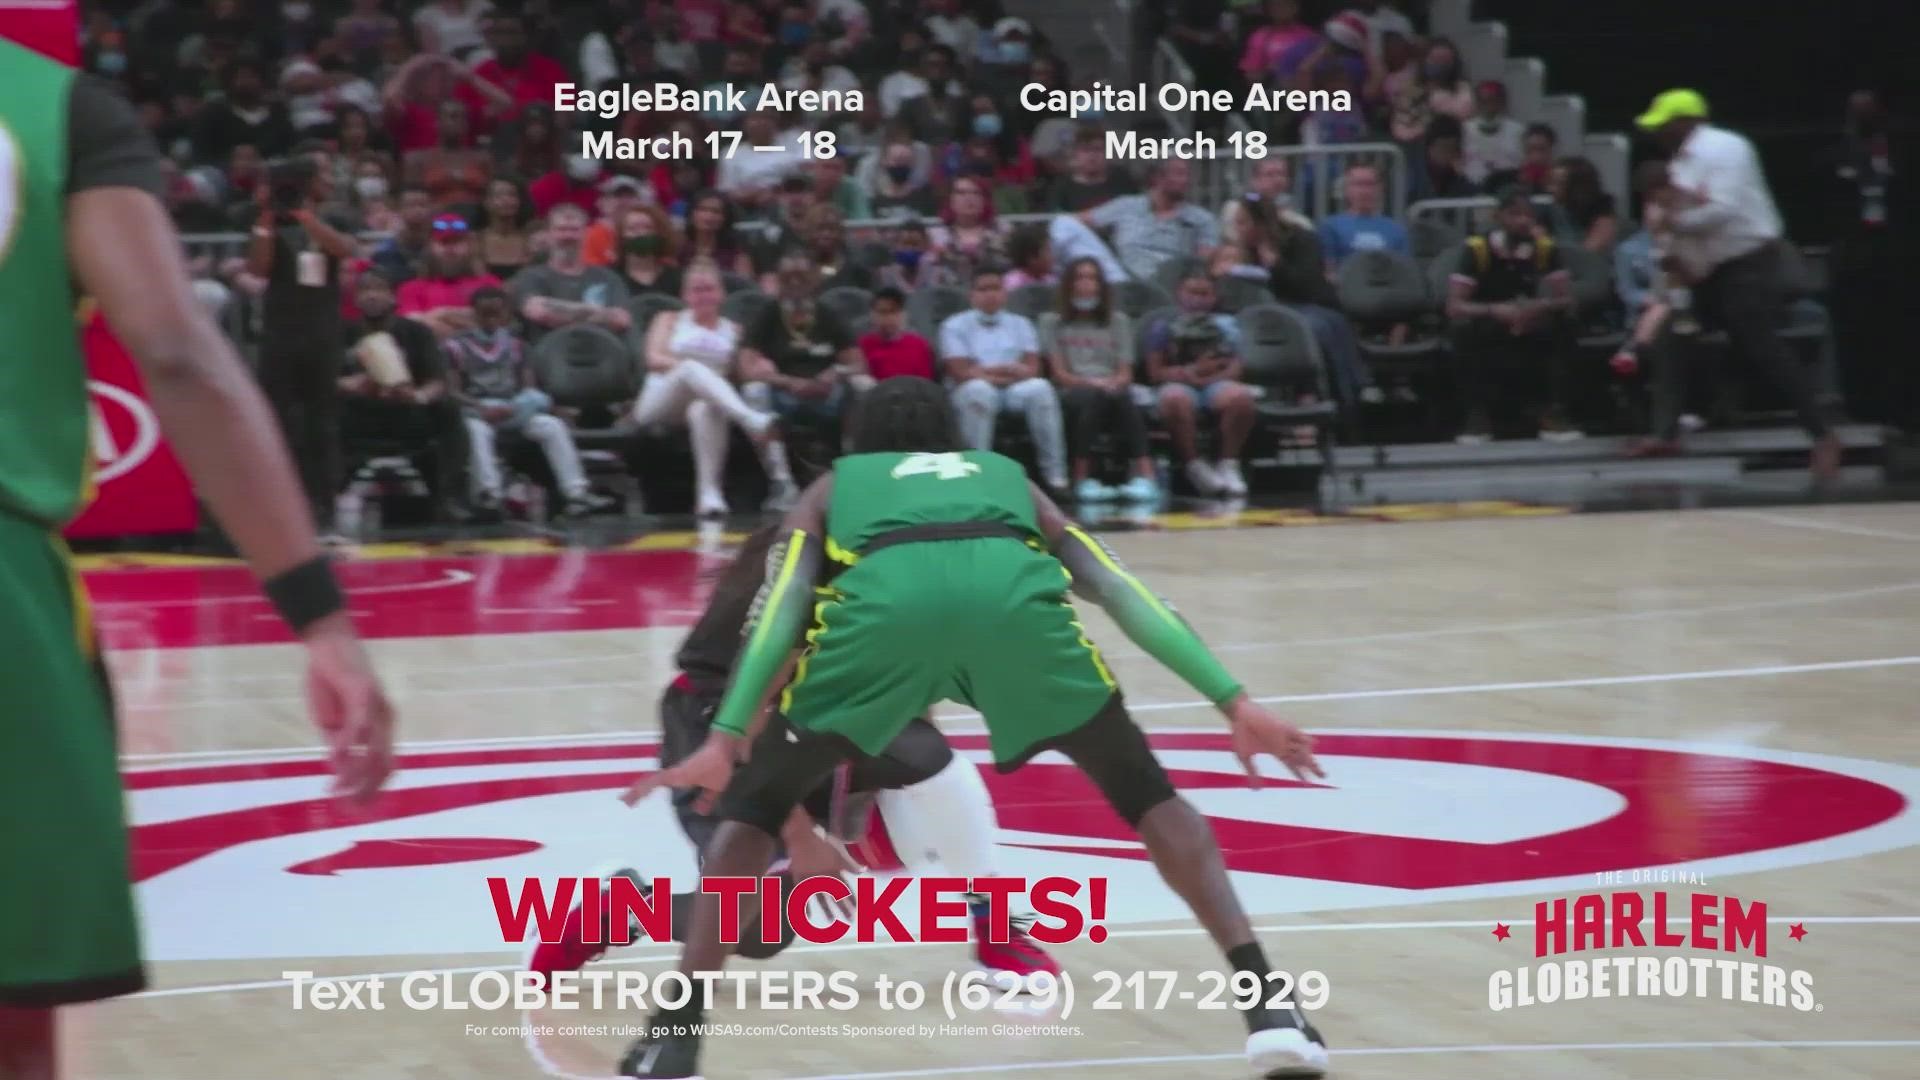 Subject to additional restrictions below, the “Text to Win Tickets to Harlem Globetrotters Giveaway" is open to legal U.S. residents 18 years and older.